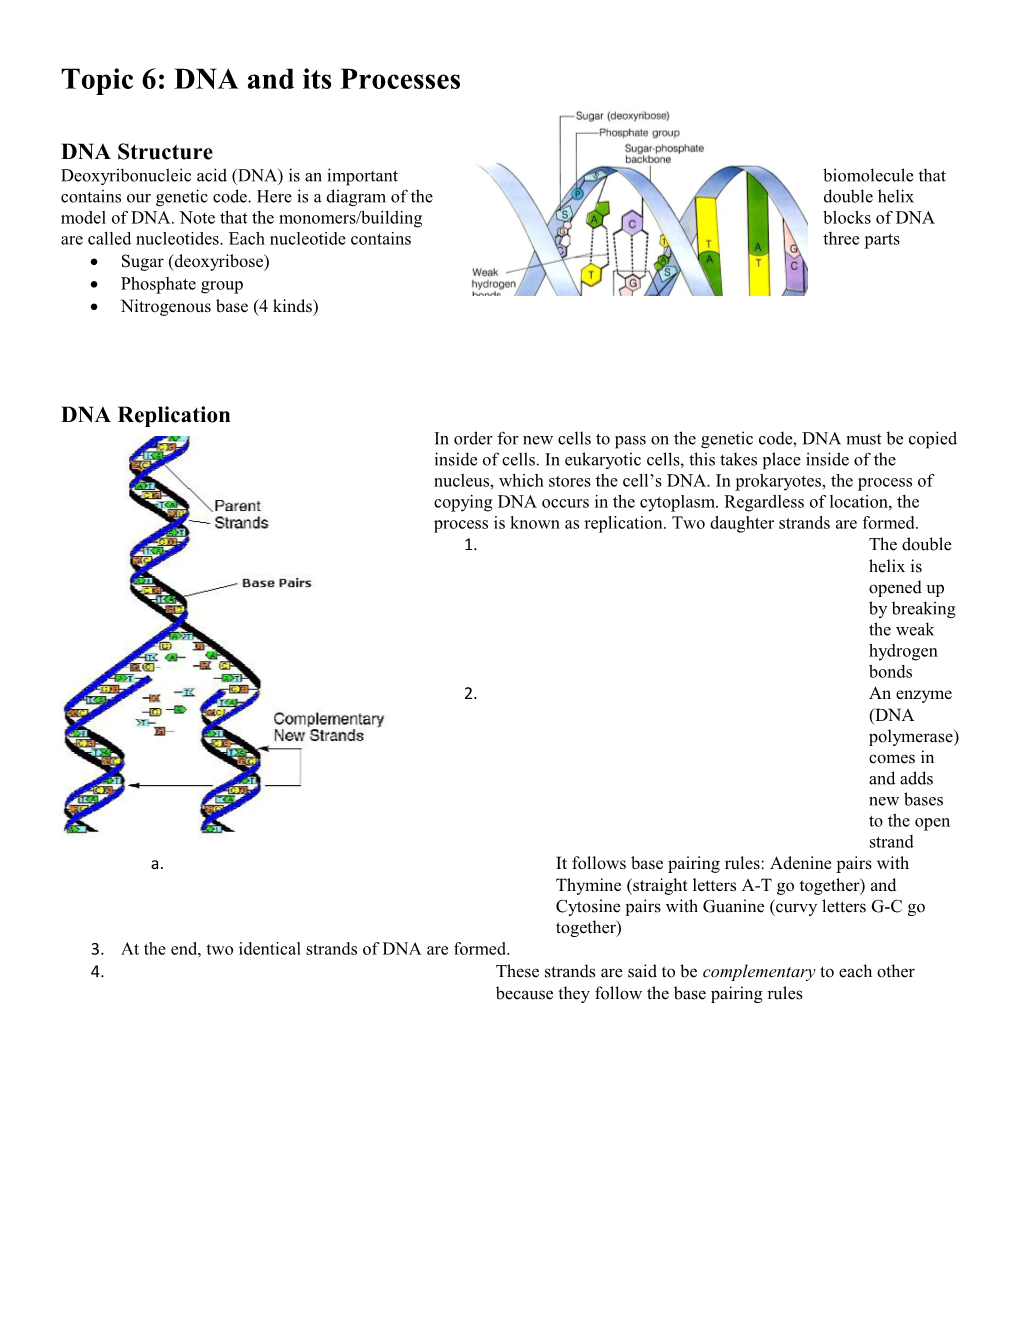 Topic 6: DNA and Its Processes